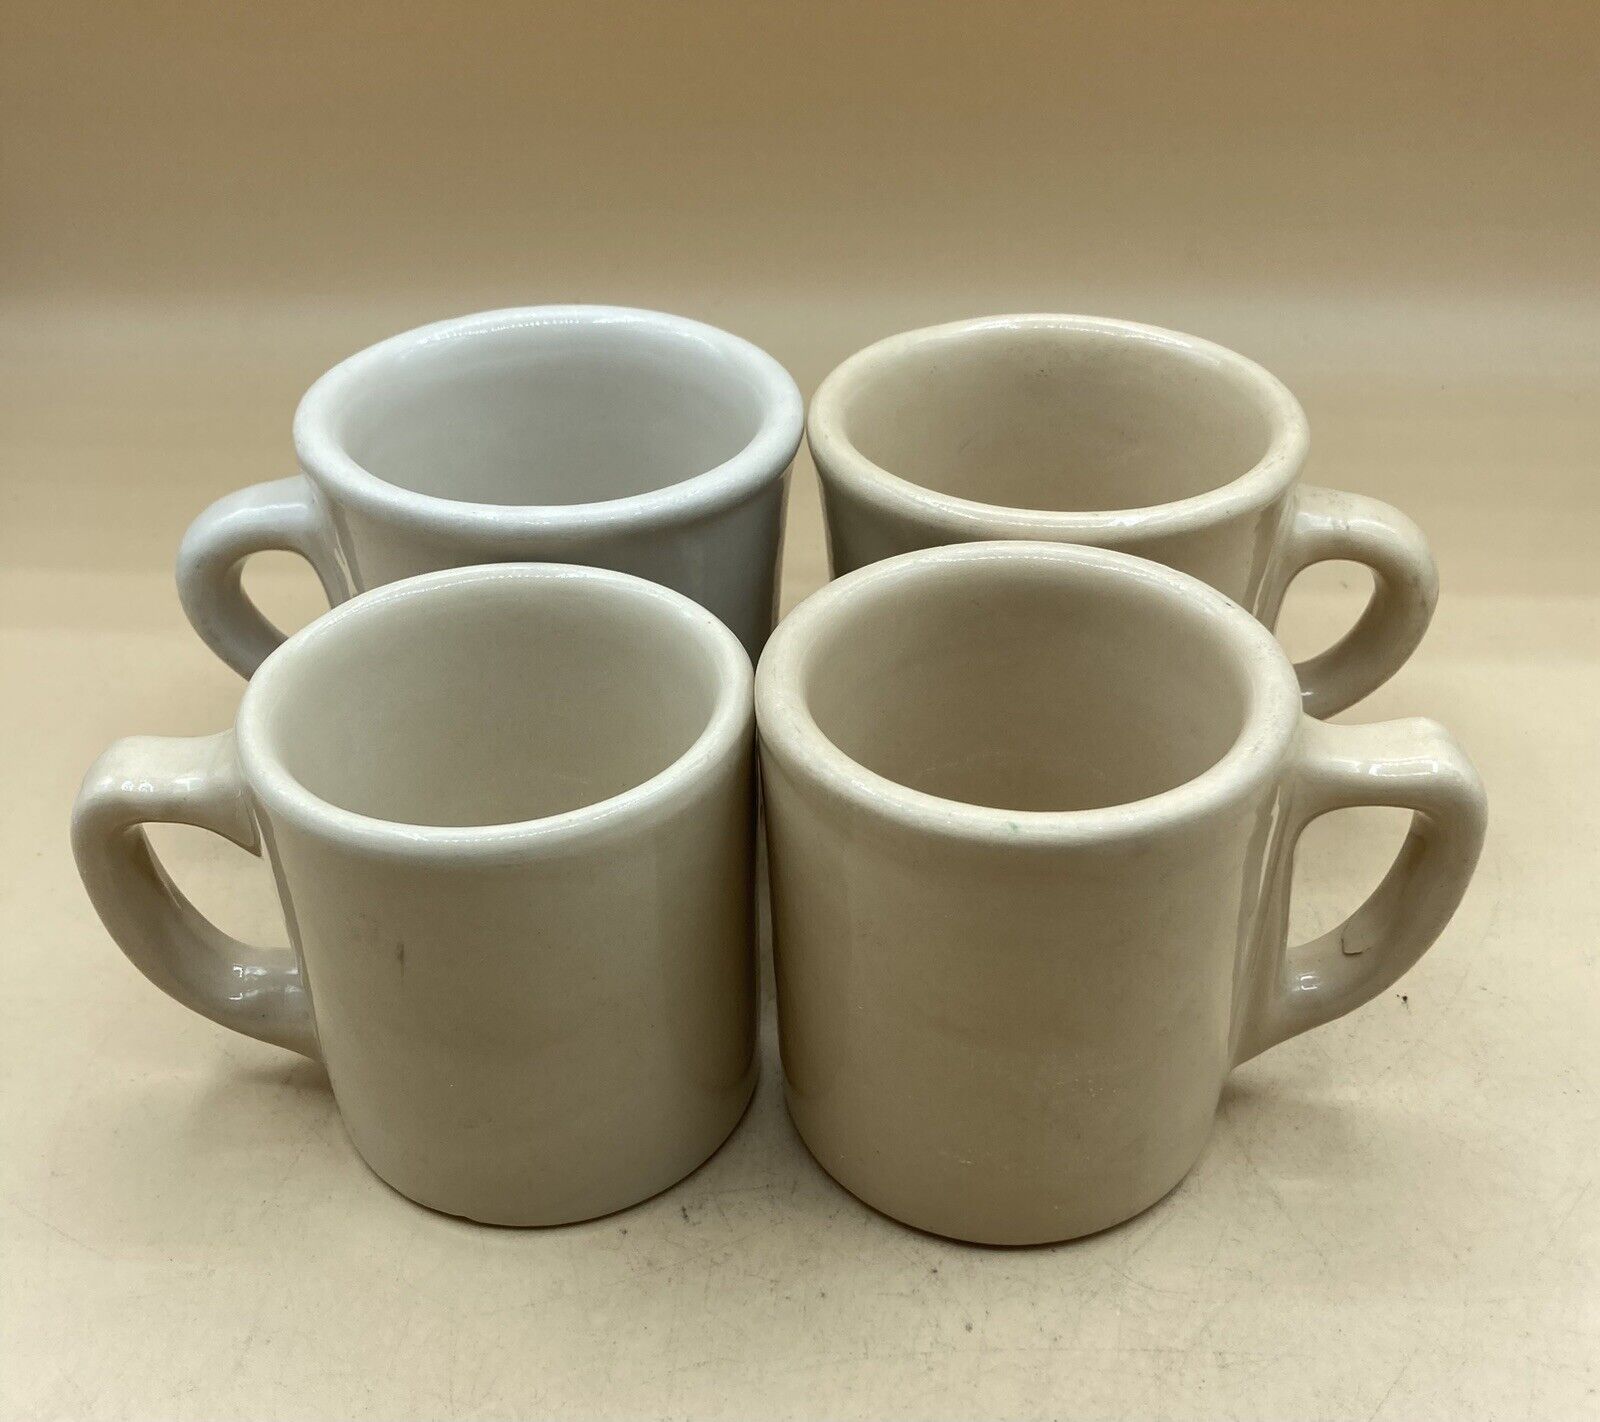 Restaurant Ware Diner Coffee Mugs LOT 4 Tepco China Mixed Sizes Tan